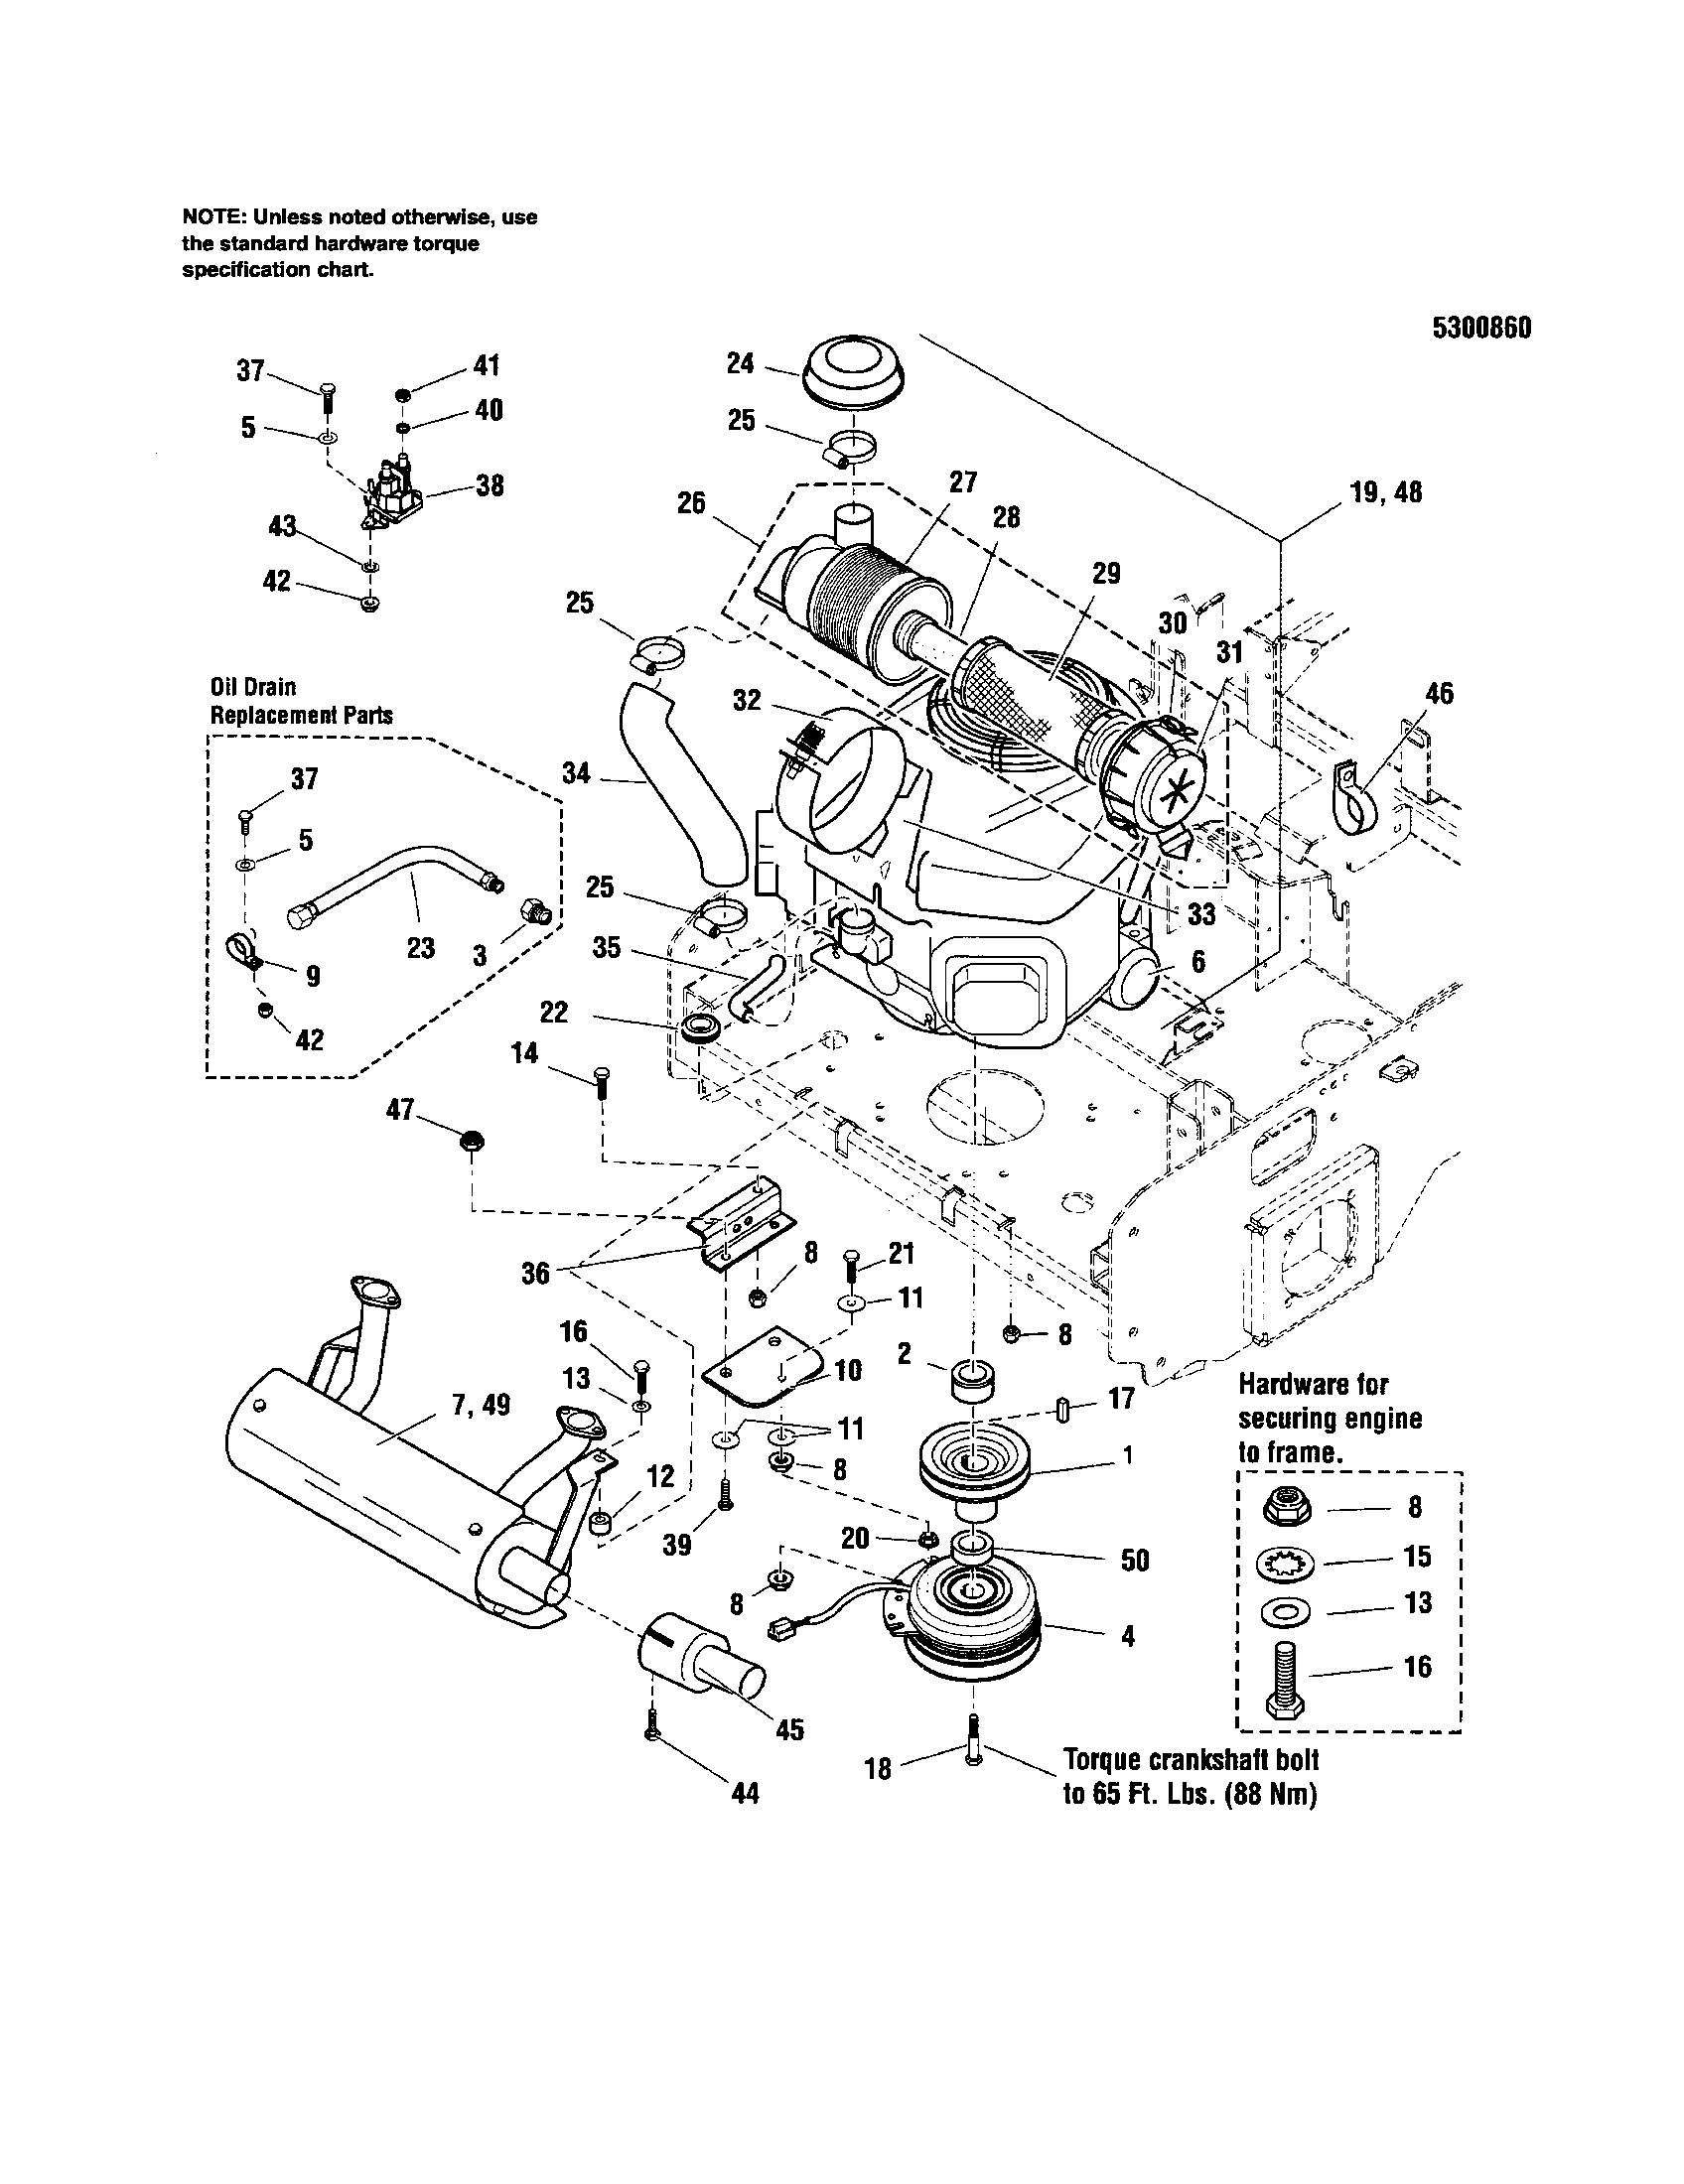 25 Hp Kohler Engine Wiring Diagram from c.searspartsdirect.com